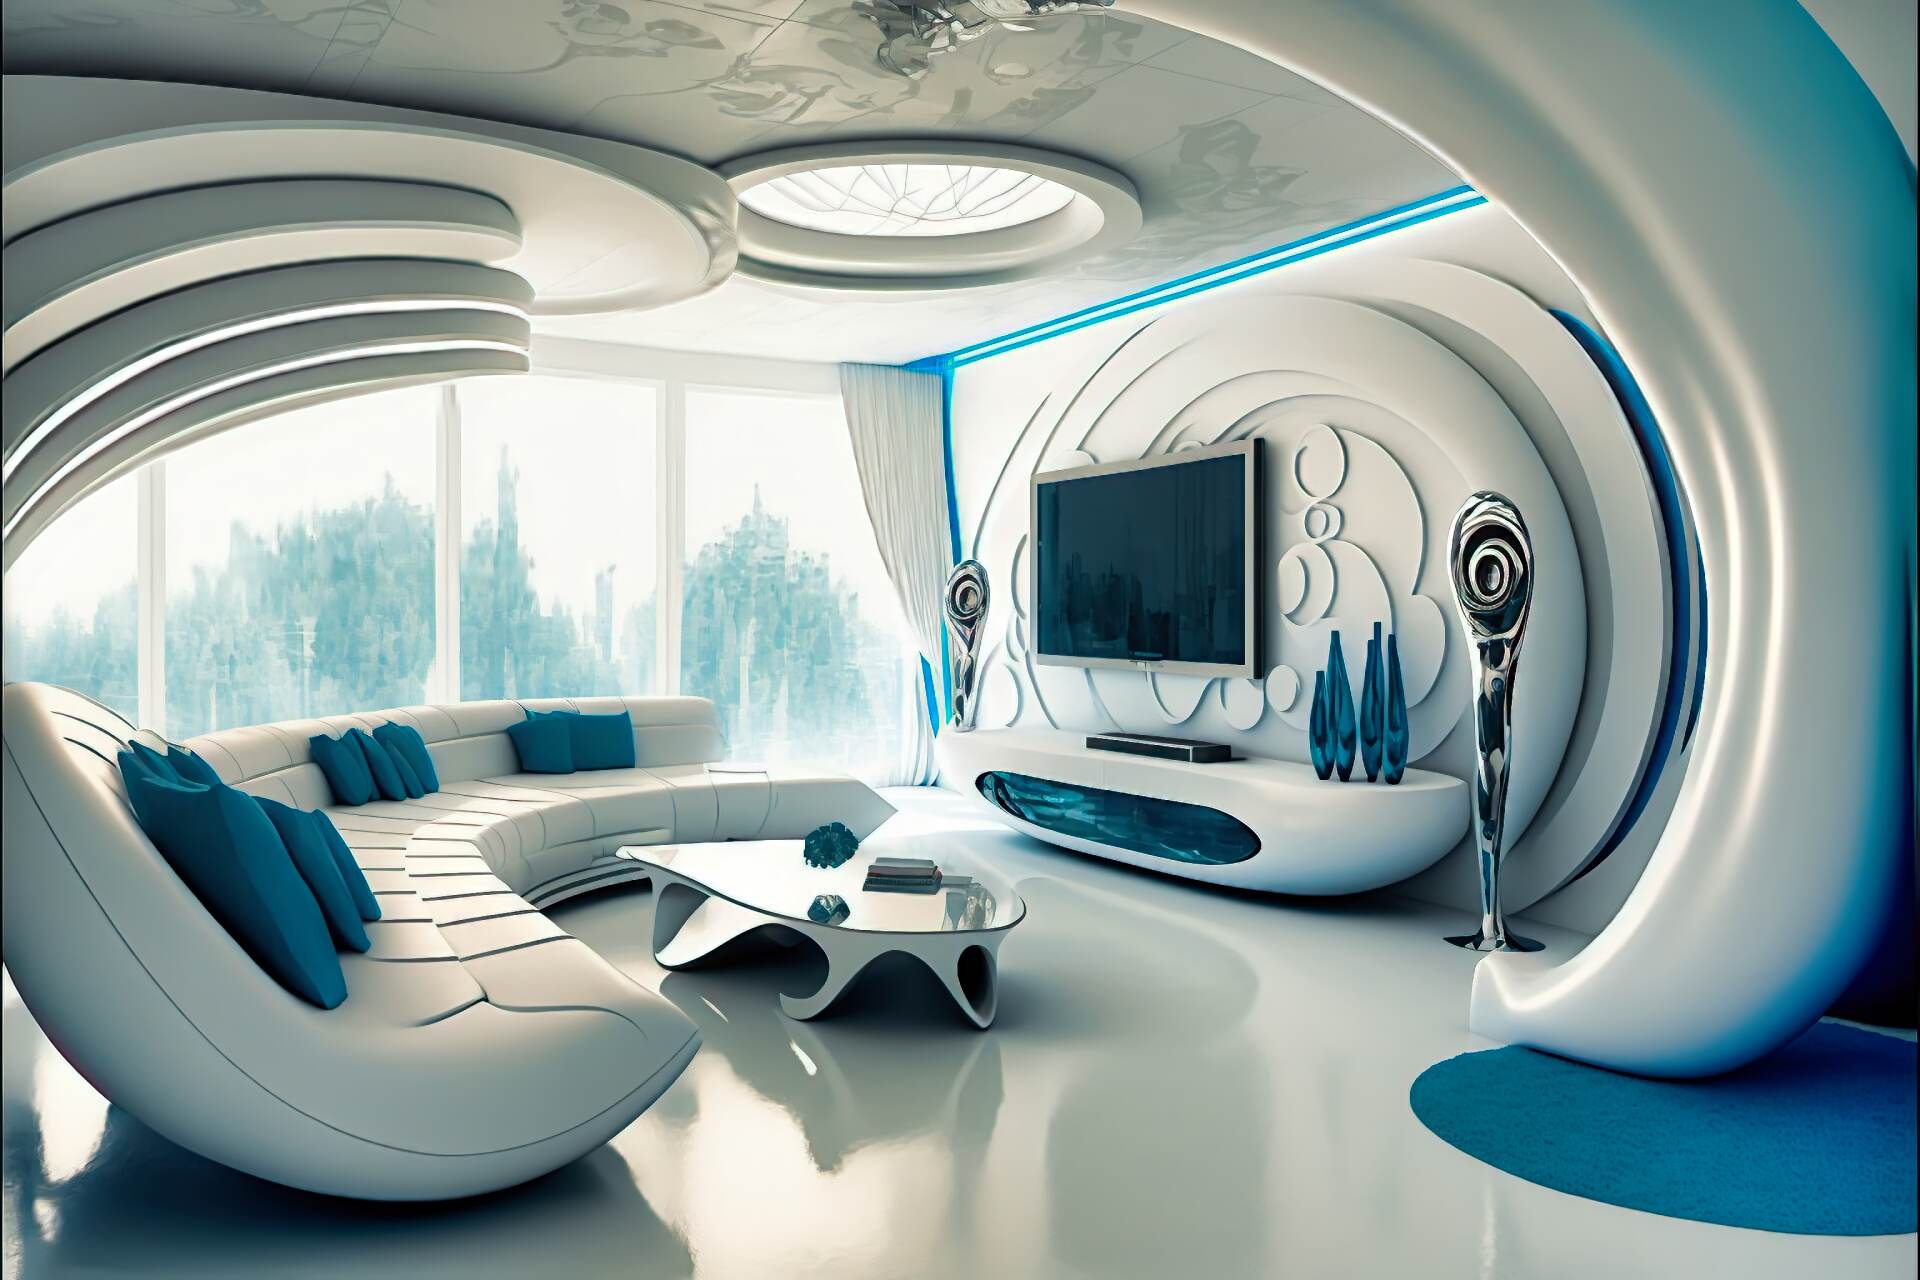 Futuristic Living Room With A Soft Grey And White Space. A Curved White Wall Holds The Giant, Flat-Screen Tv With A Sleek White Coffee Table In The Center. A Bright Blue, Modular Sofa With White Accents Is Made Up Of Chaise Lounges And Armchairs. A Clear Acrylic Coffee Table, With A Futuristic Silver Base, Adds A Touch Of Glamour. Soft Grey Curtains Hang From Above And White Light Fixtures Provide A Subtle Glow.